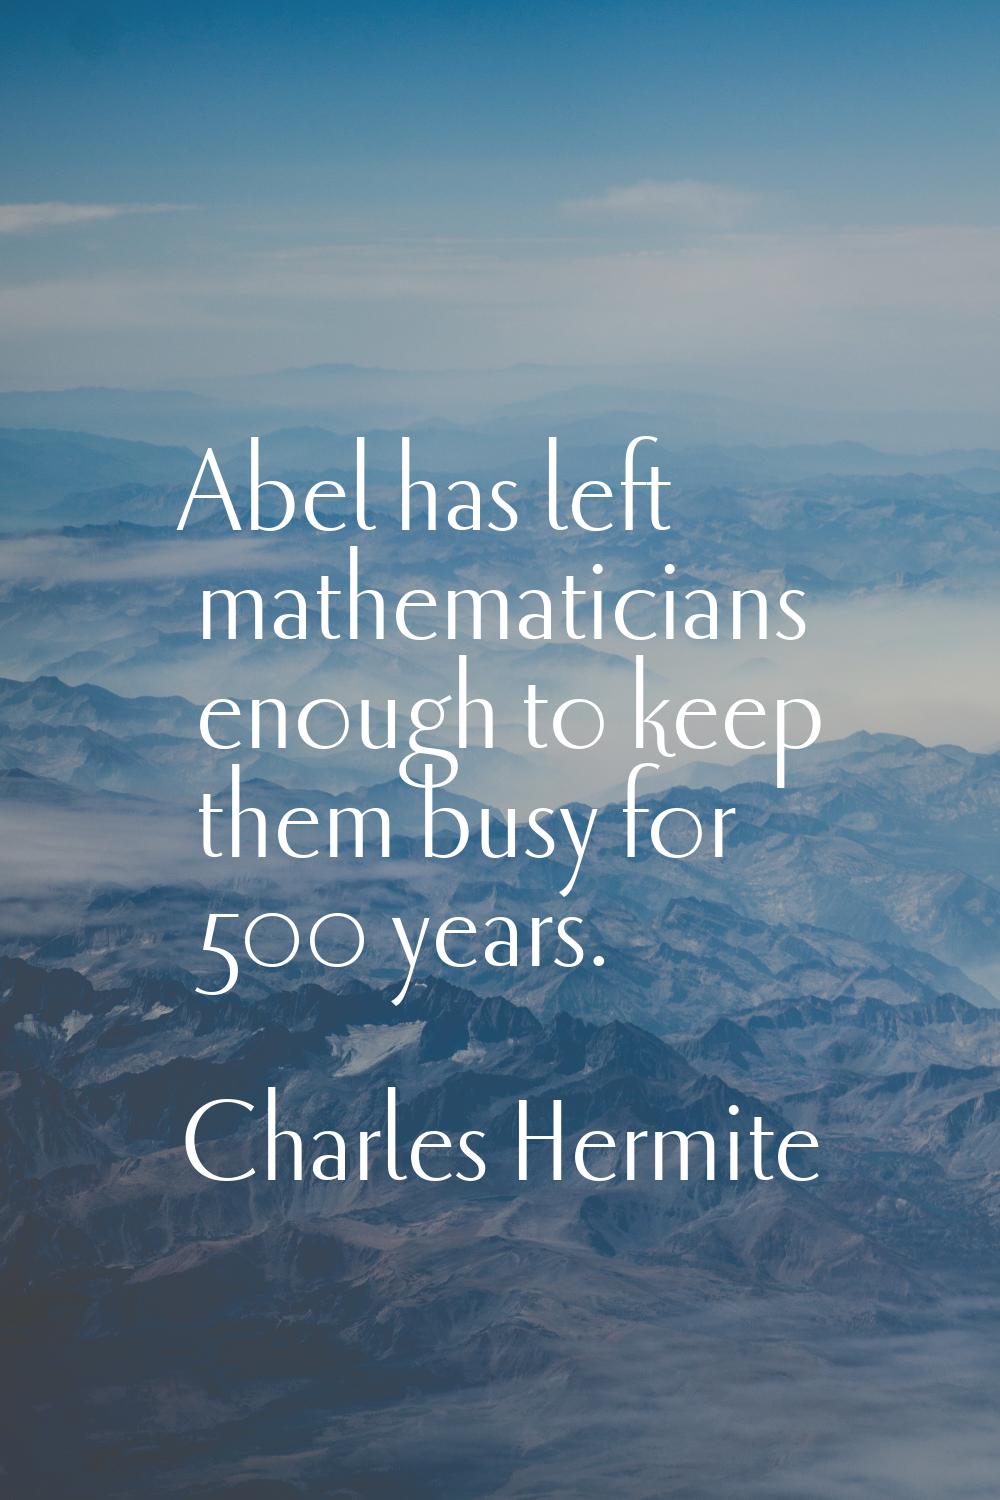 Abel has left mathematicians enough to keep them busy for 500 years.